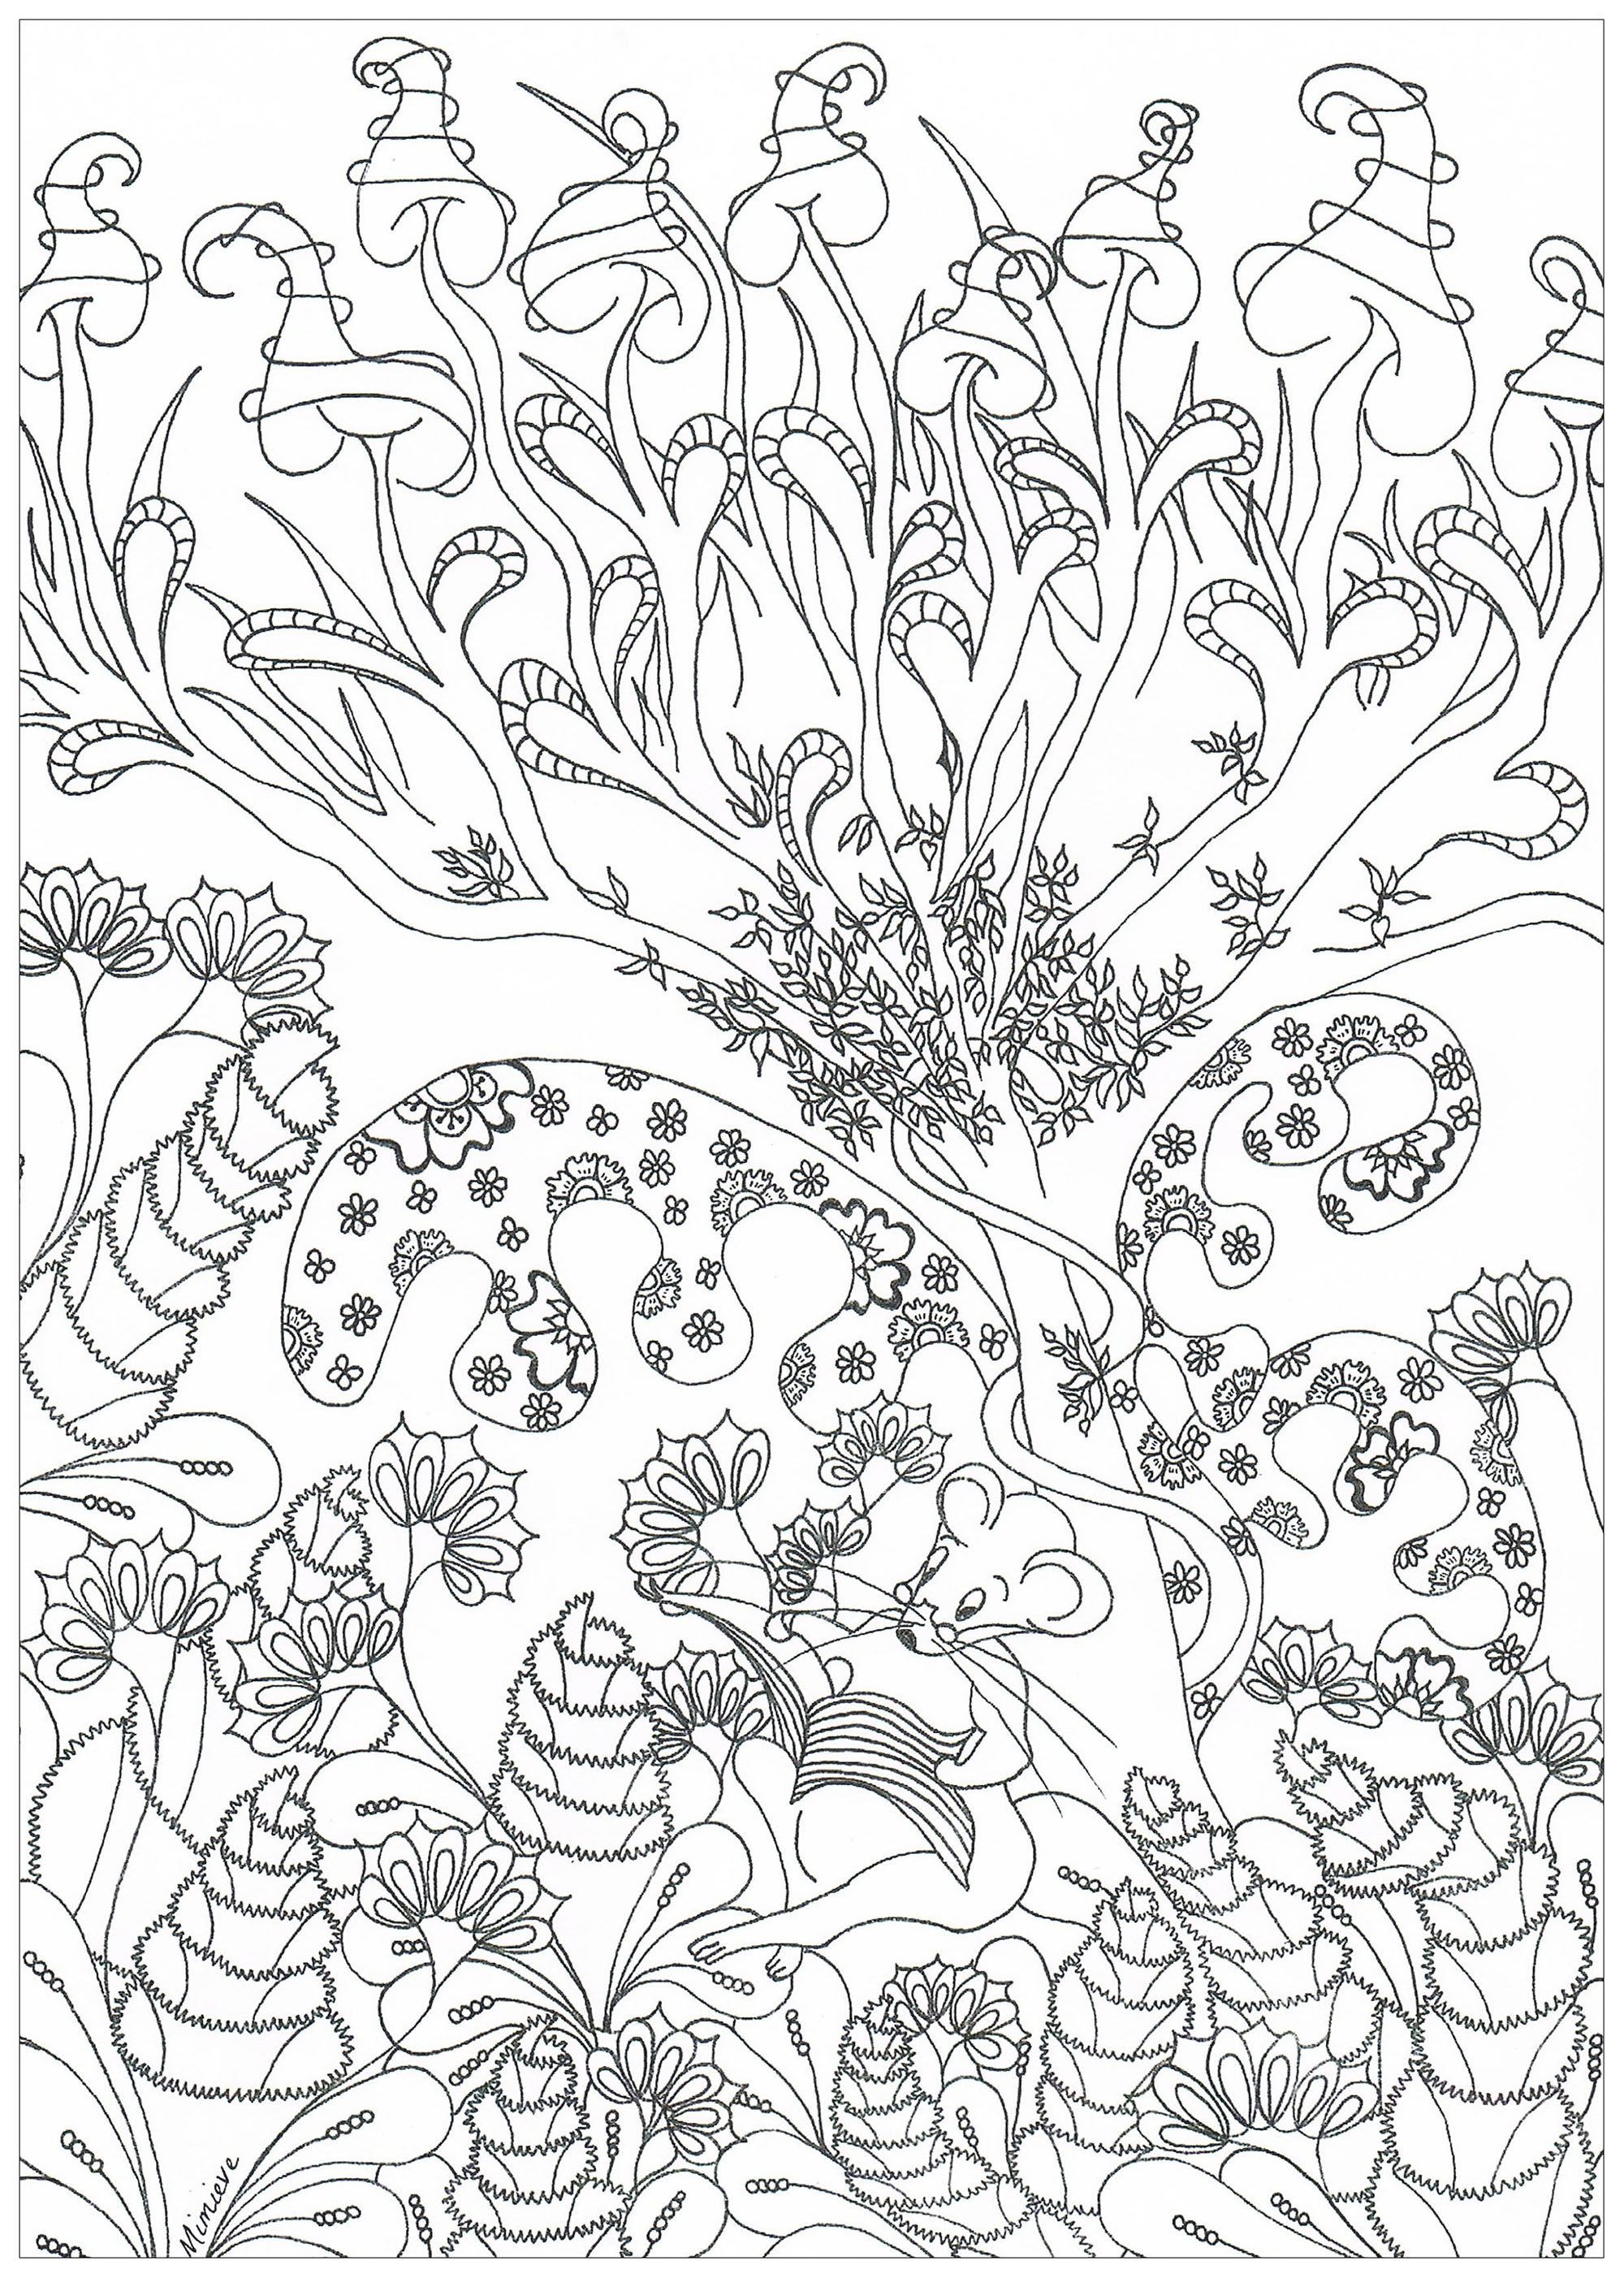 adult coloring image animal forest